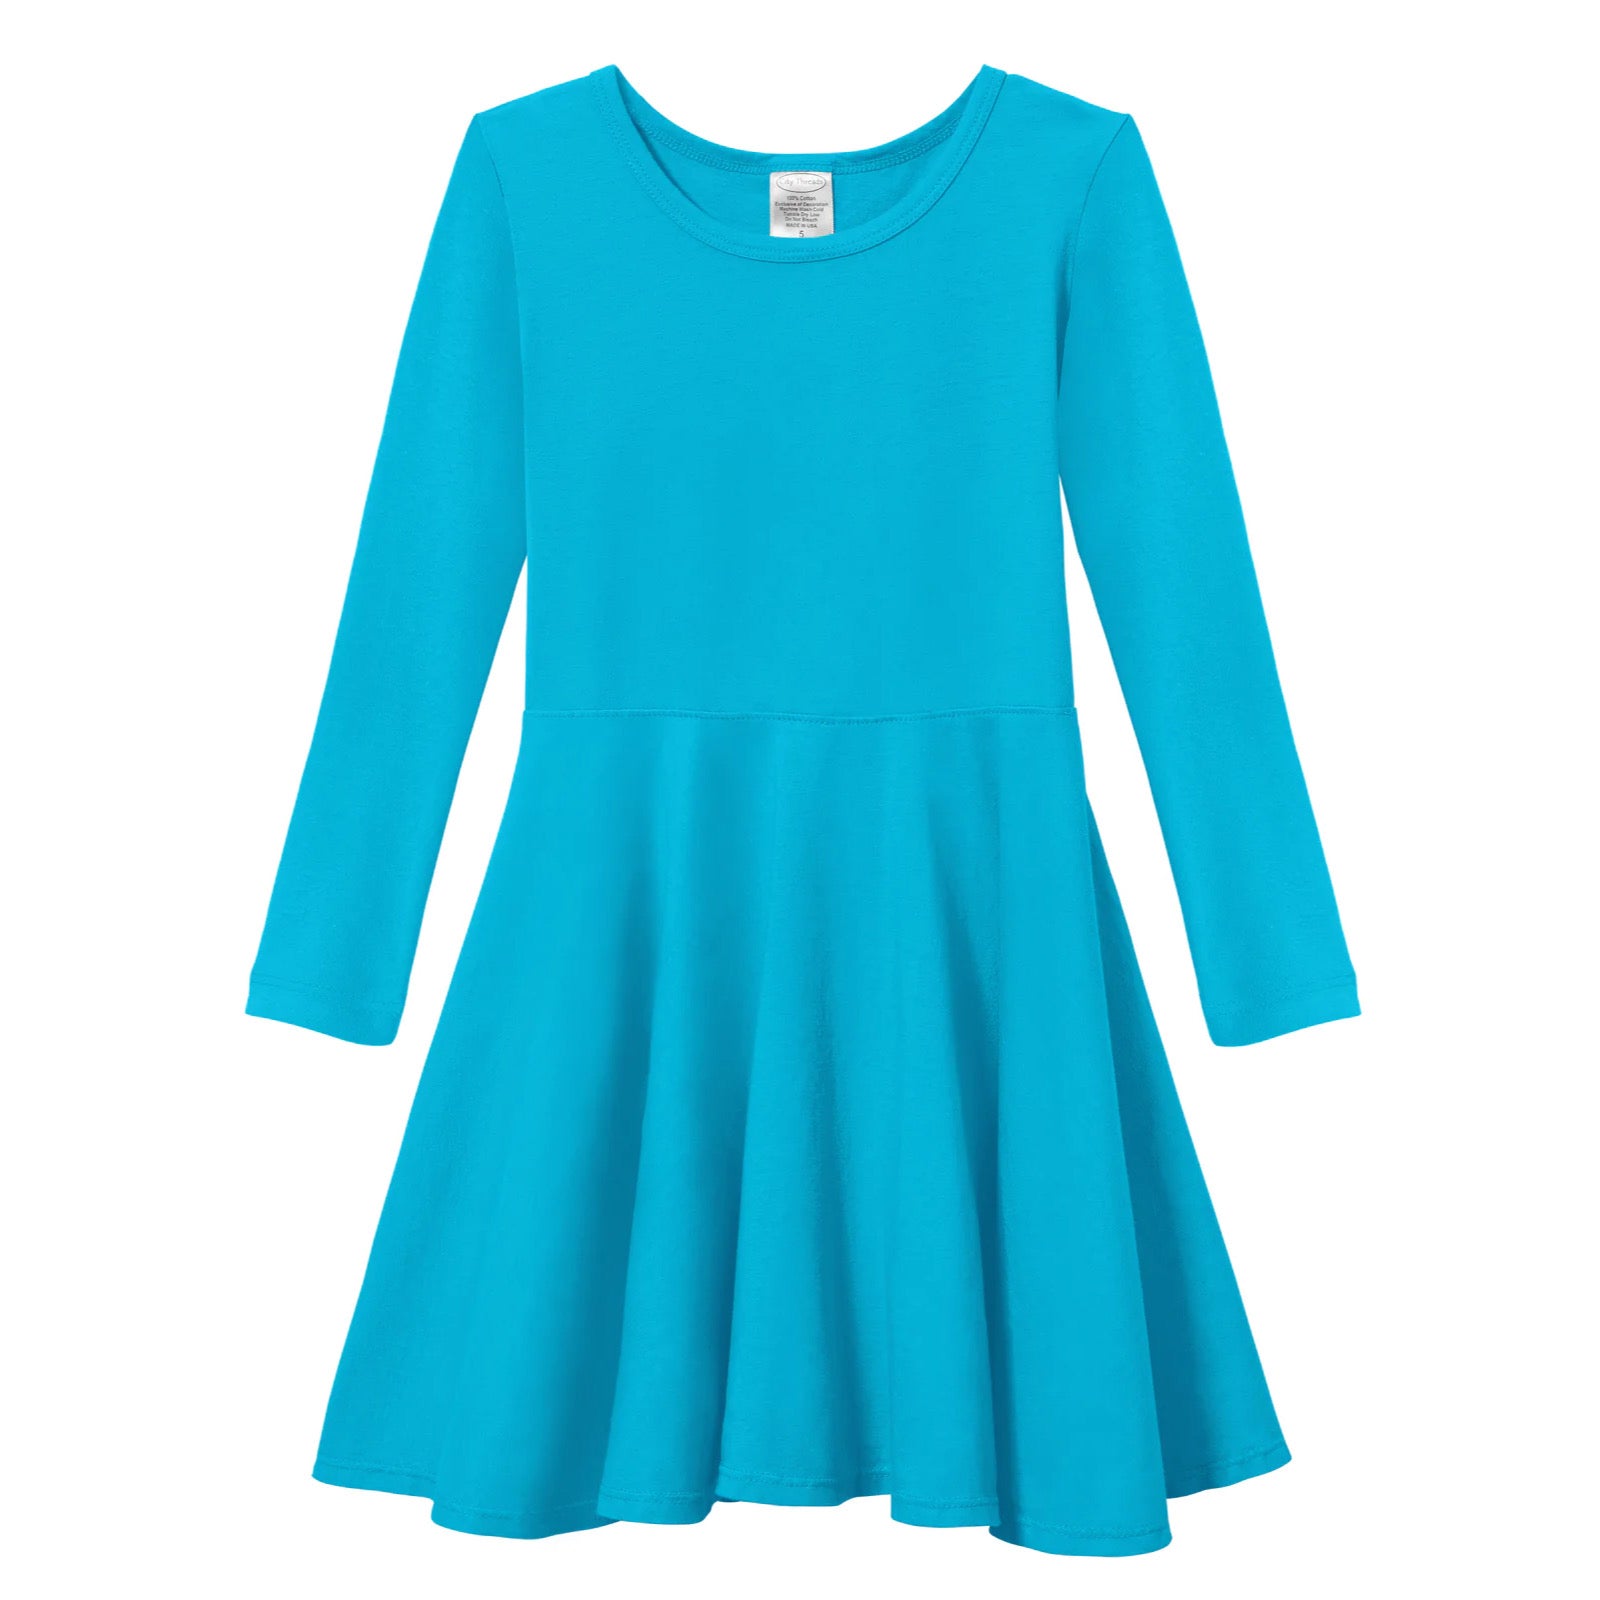 Made in USA Long Sleeve Twirly Toddler Dress - Turquoise Blue